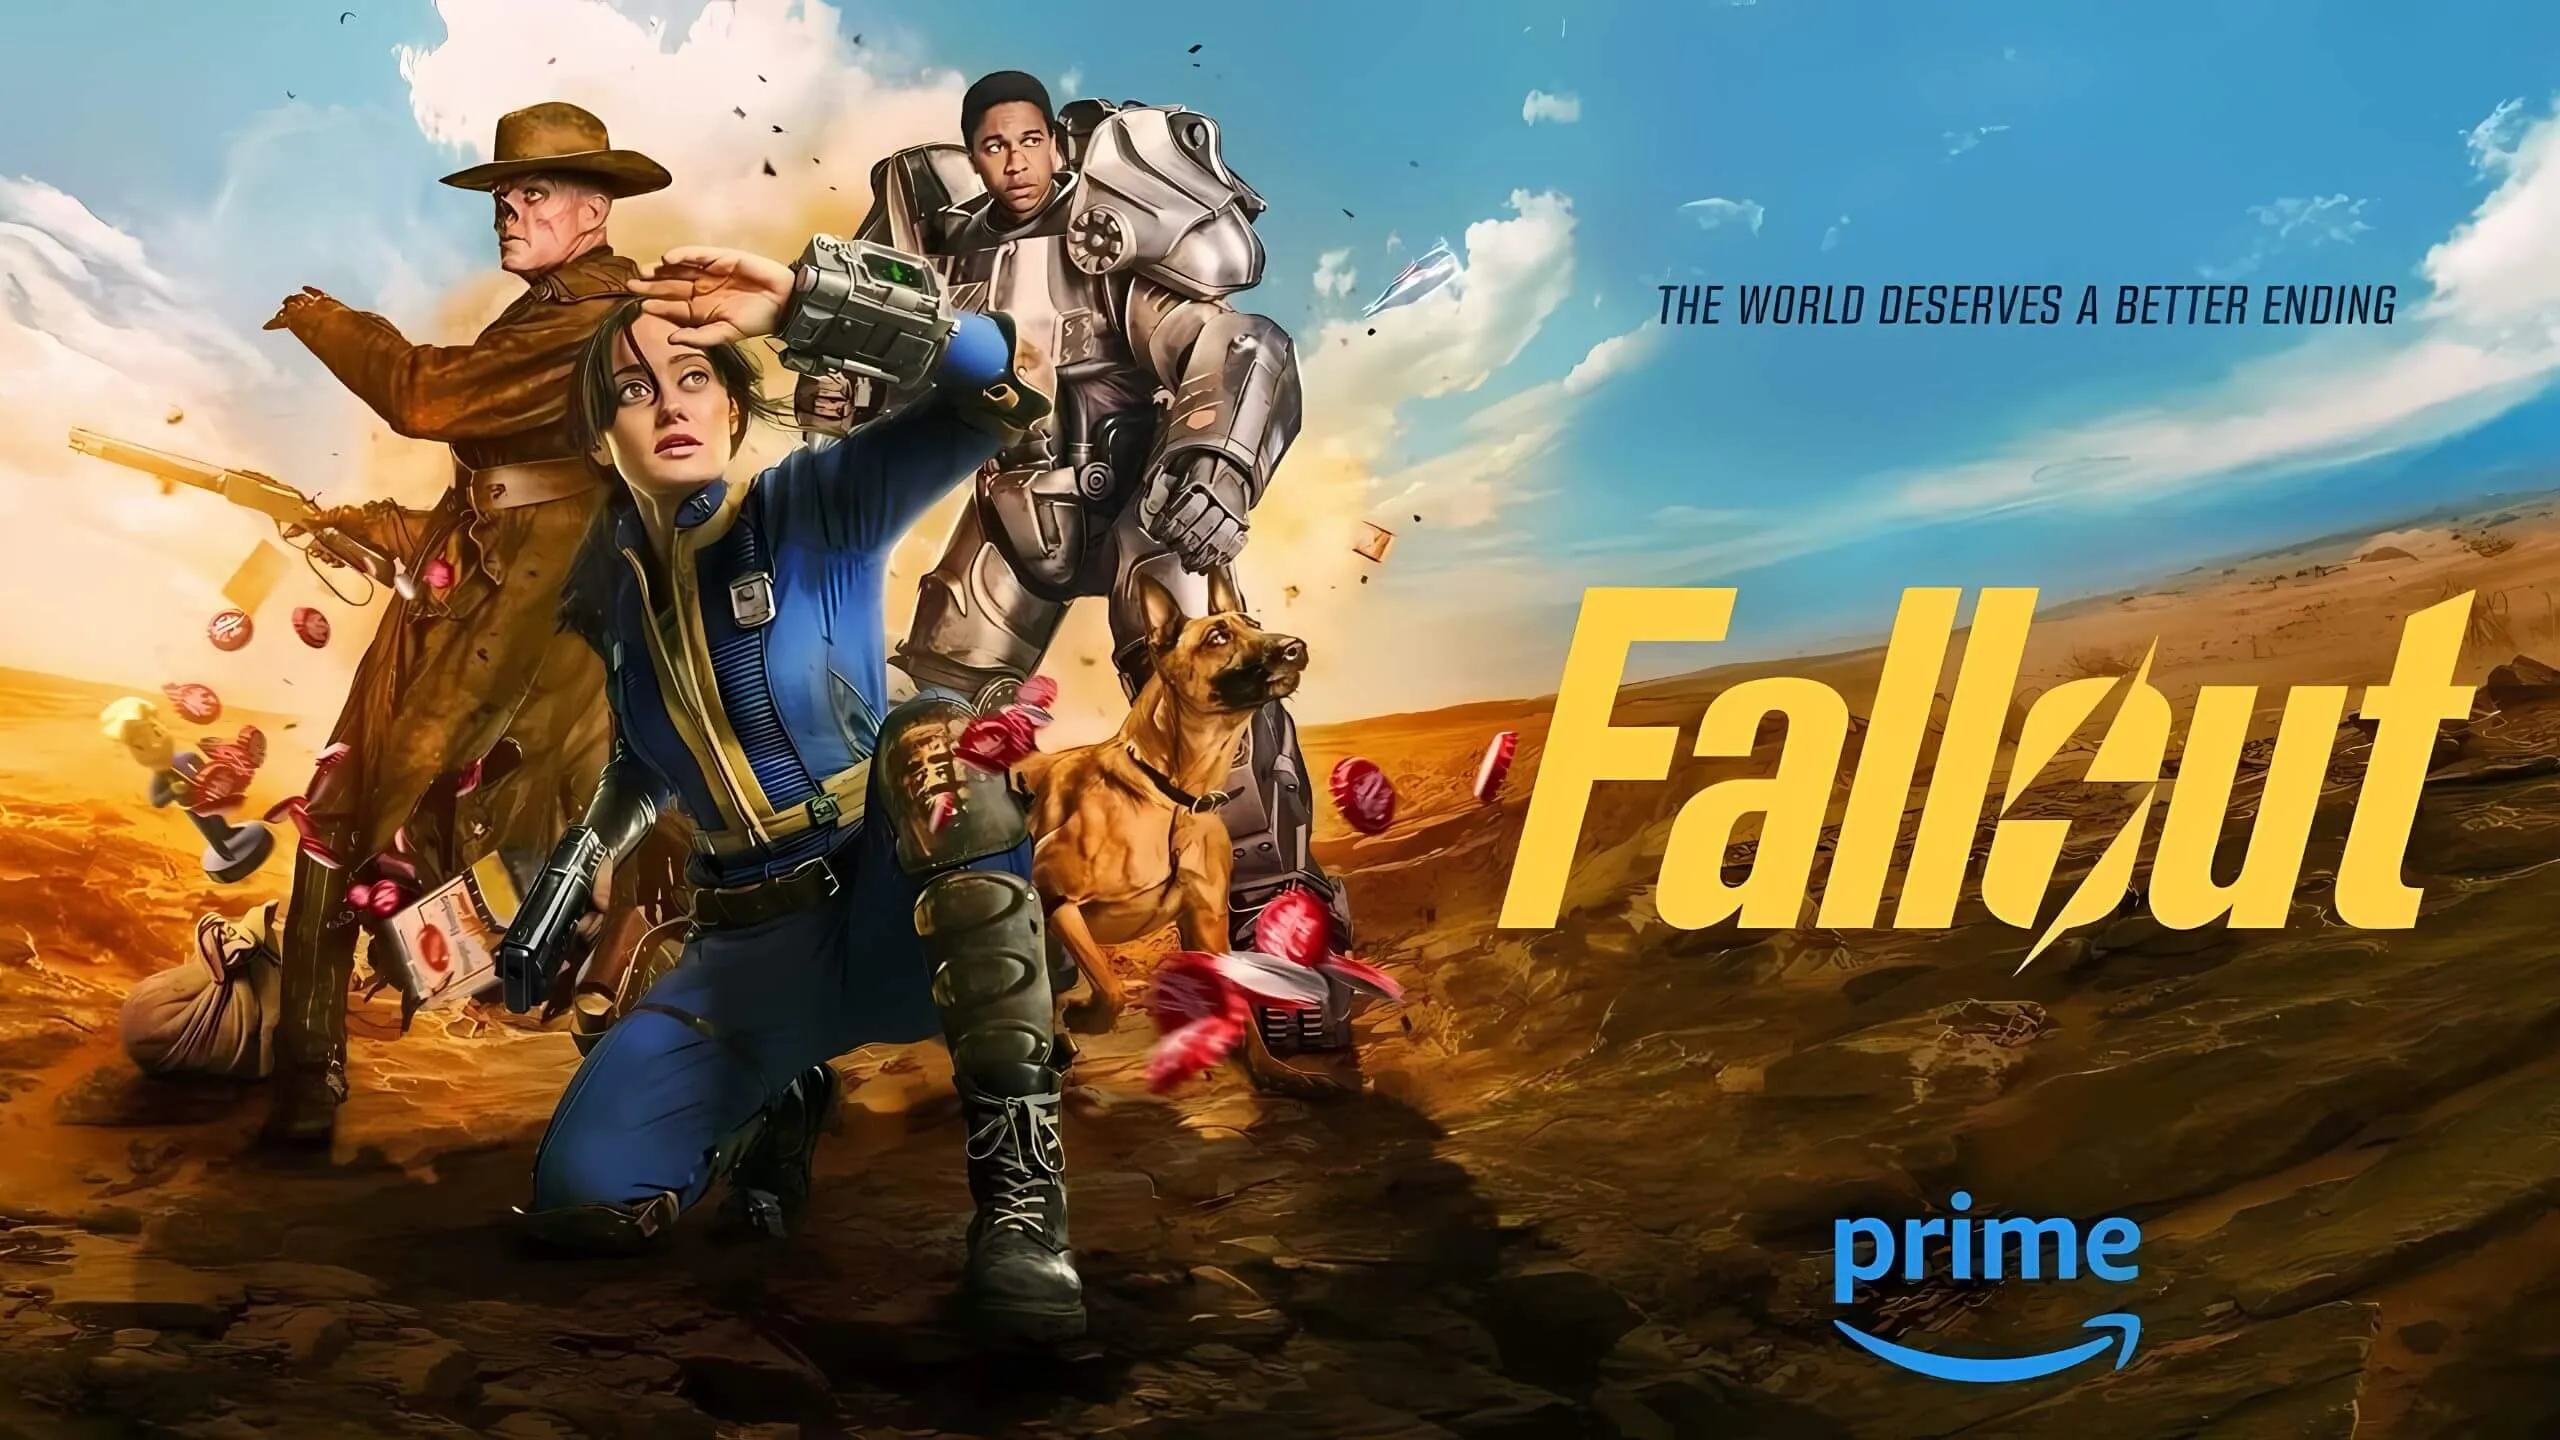 Fallout: Amazon Prime's Gripping Post-Apocalyptic Masterpiece